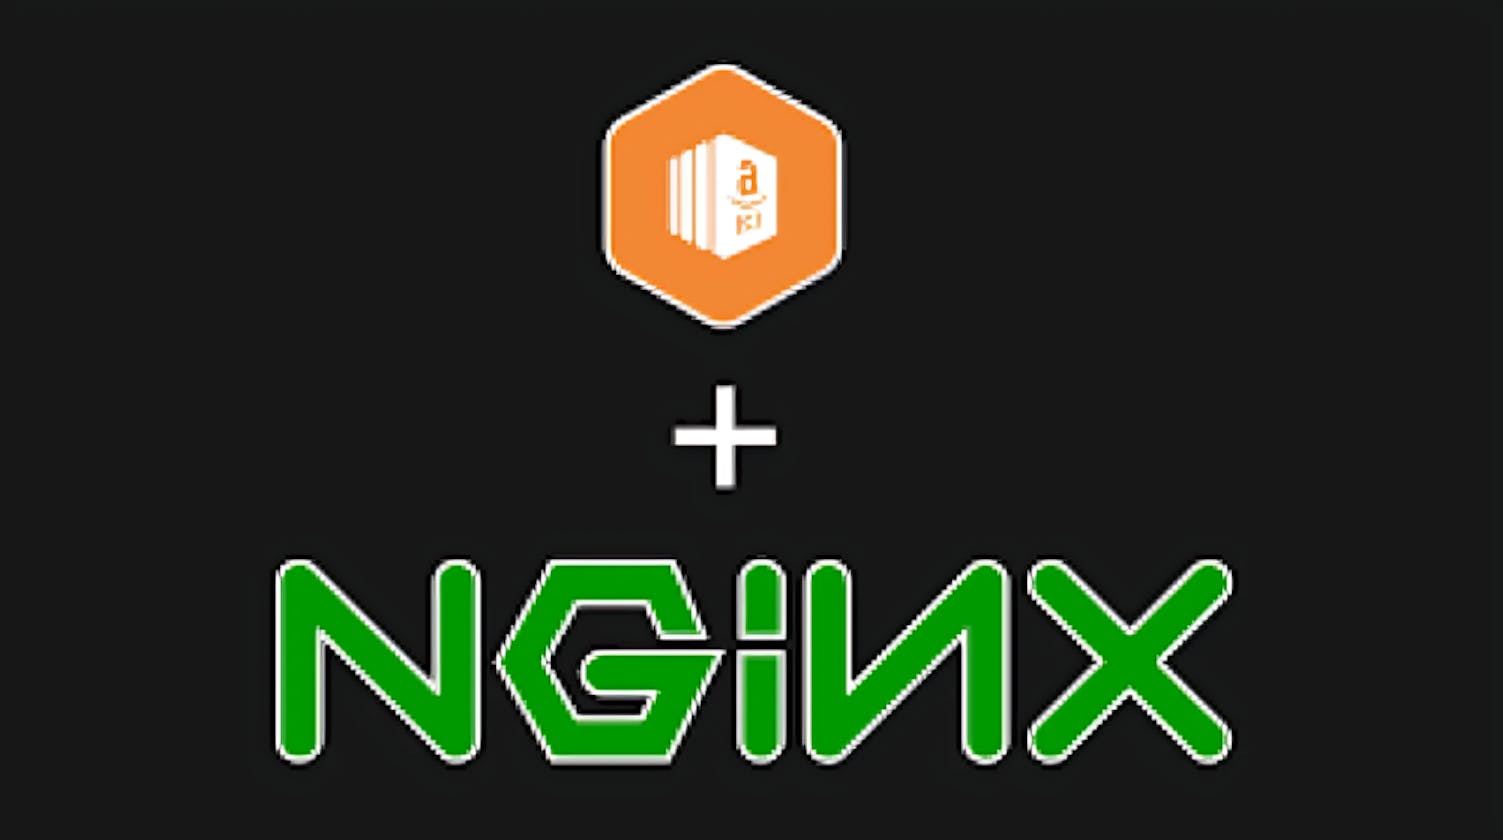 How to use NGINX as a Reverse Proxy with AWS EC2?